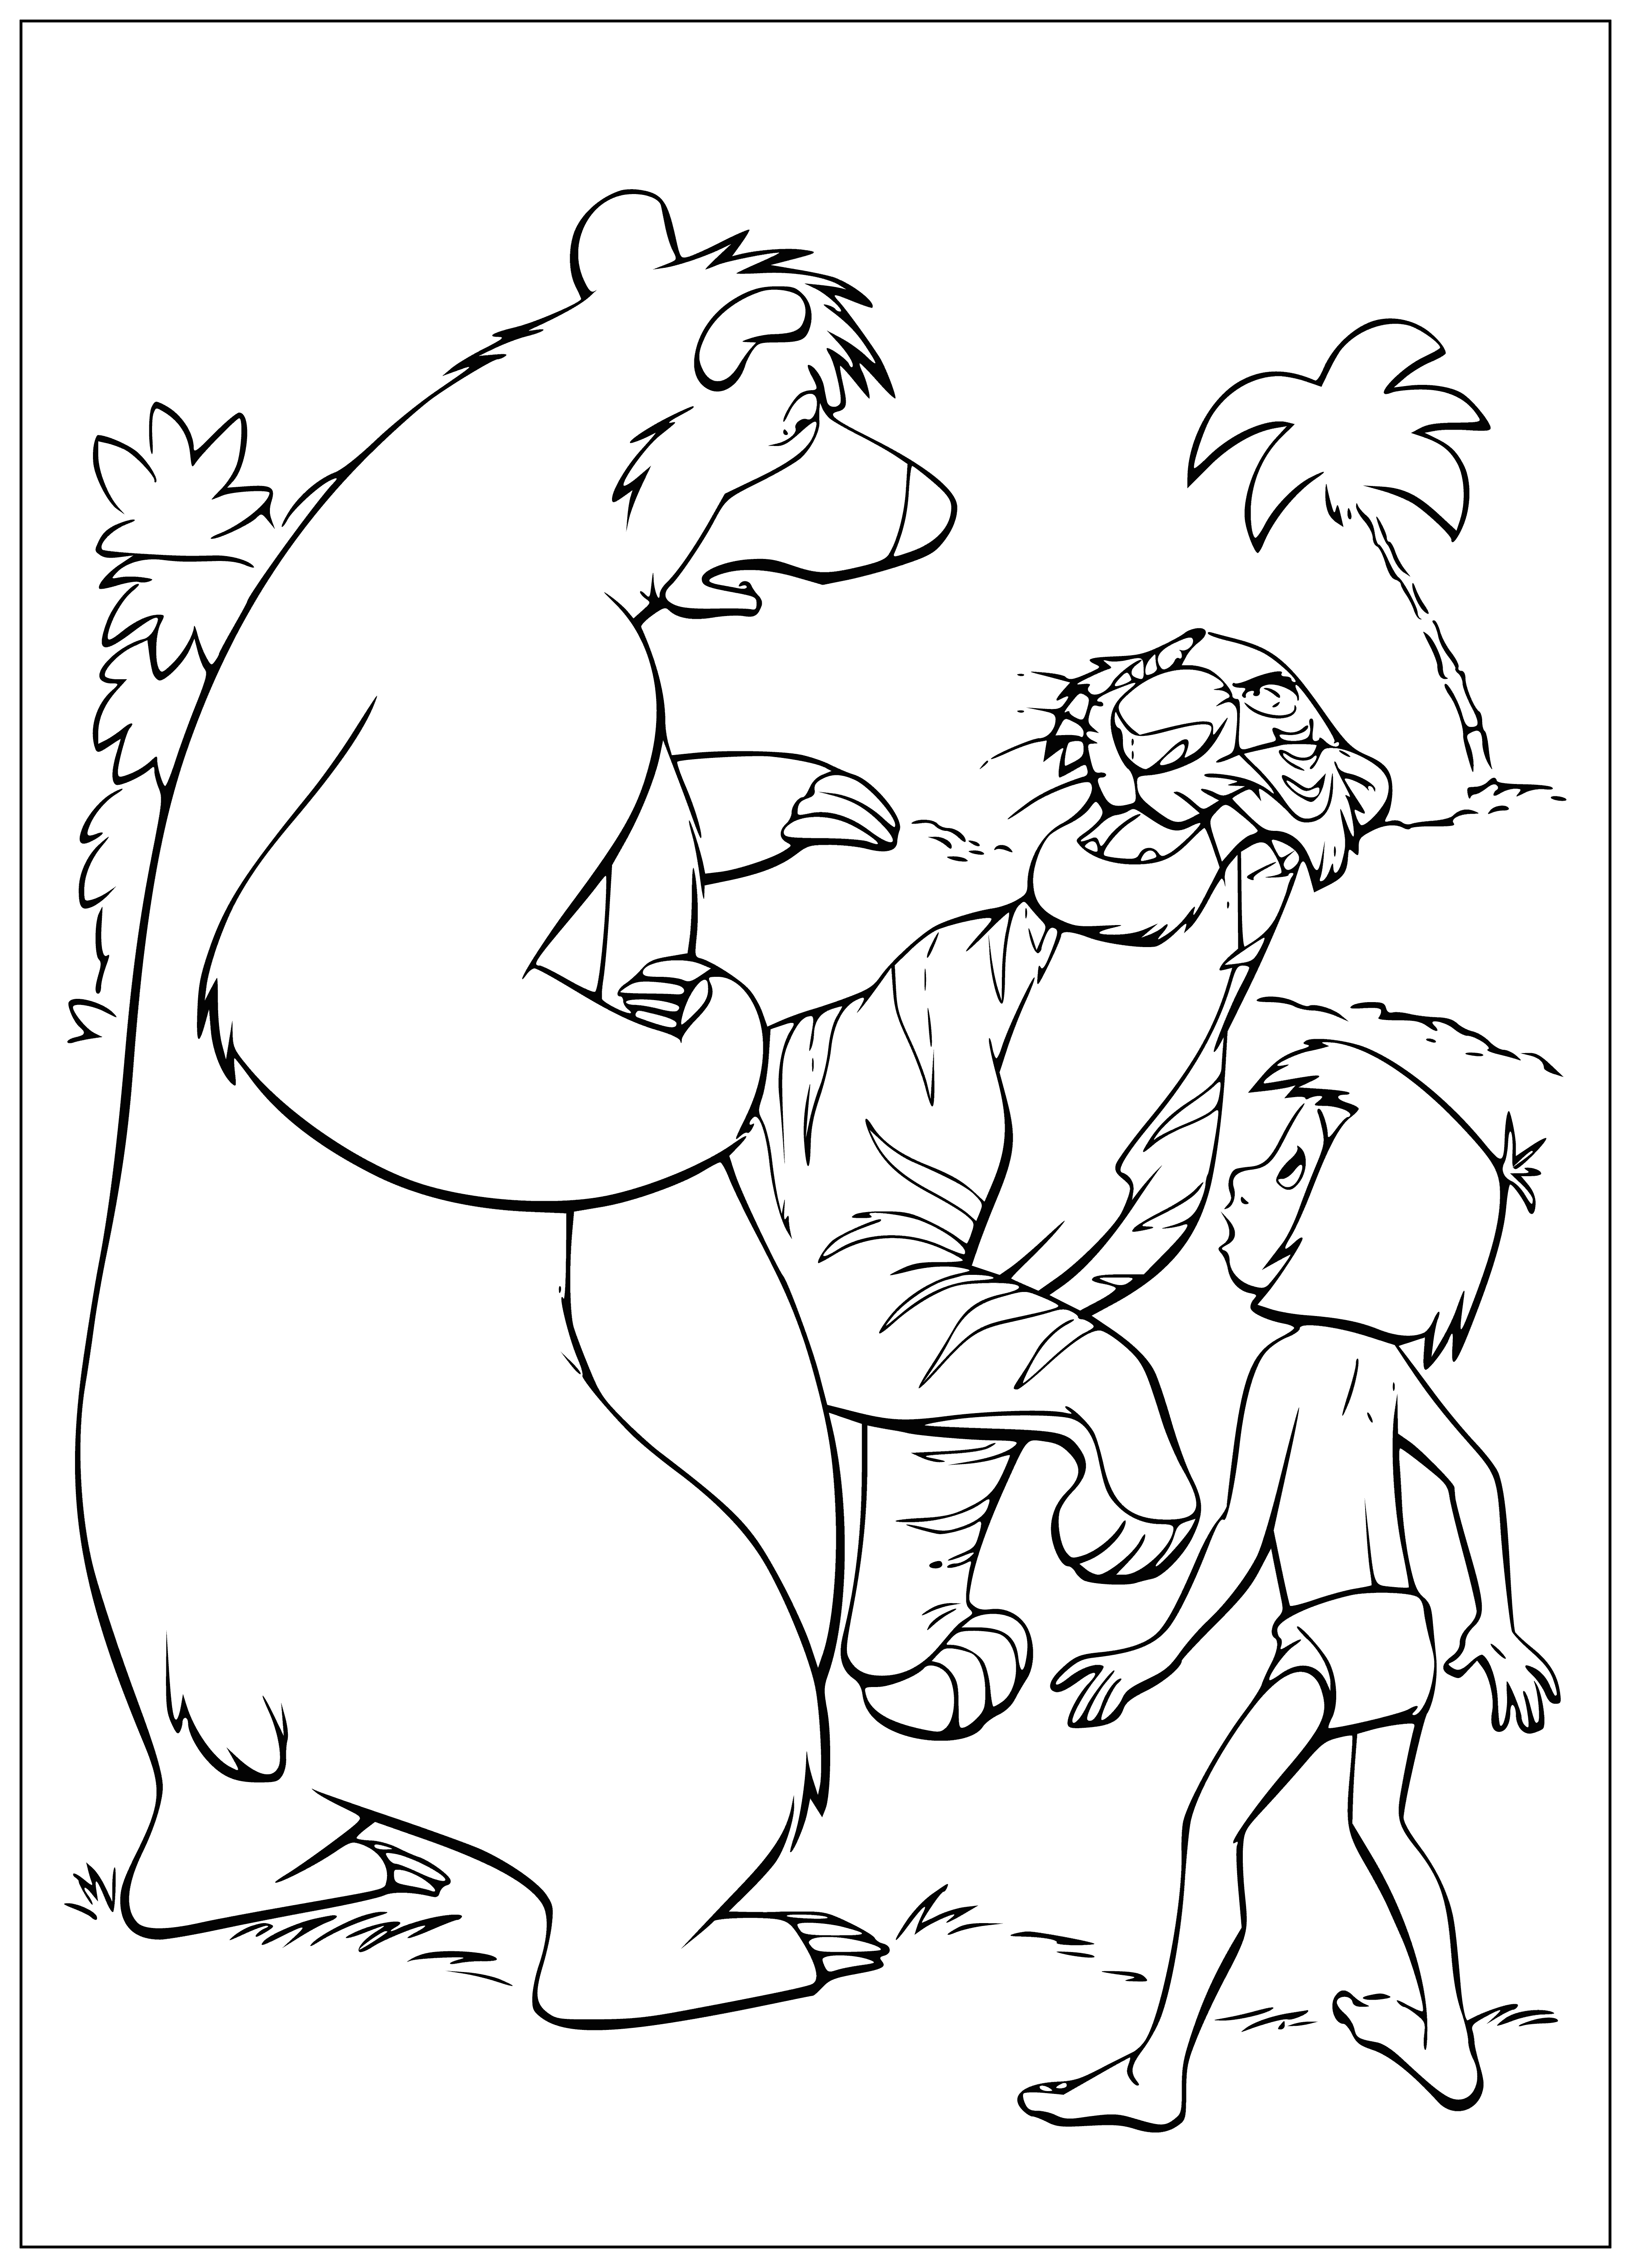 coloring page: Animals discussing around a giant tree in the clearing in The Jungle Book - a timeless classic.